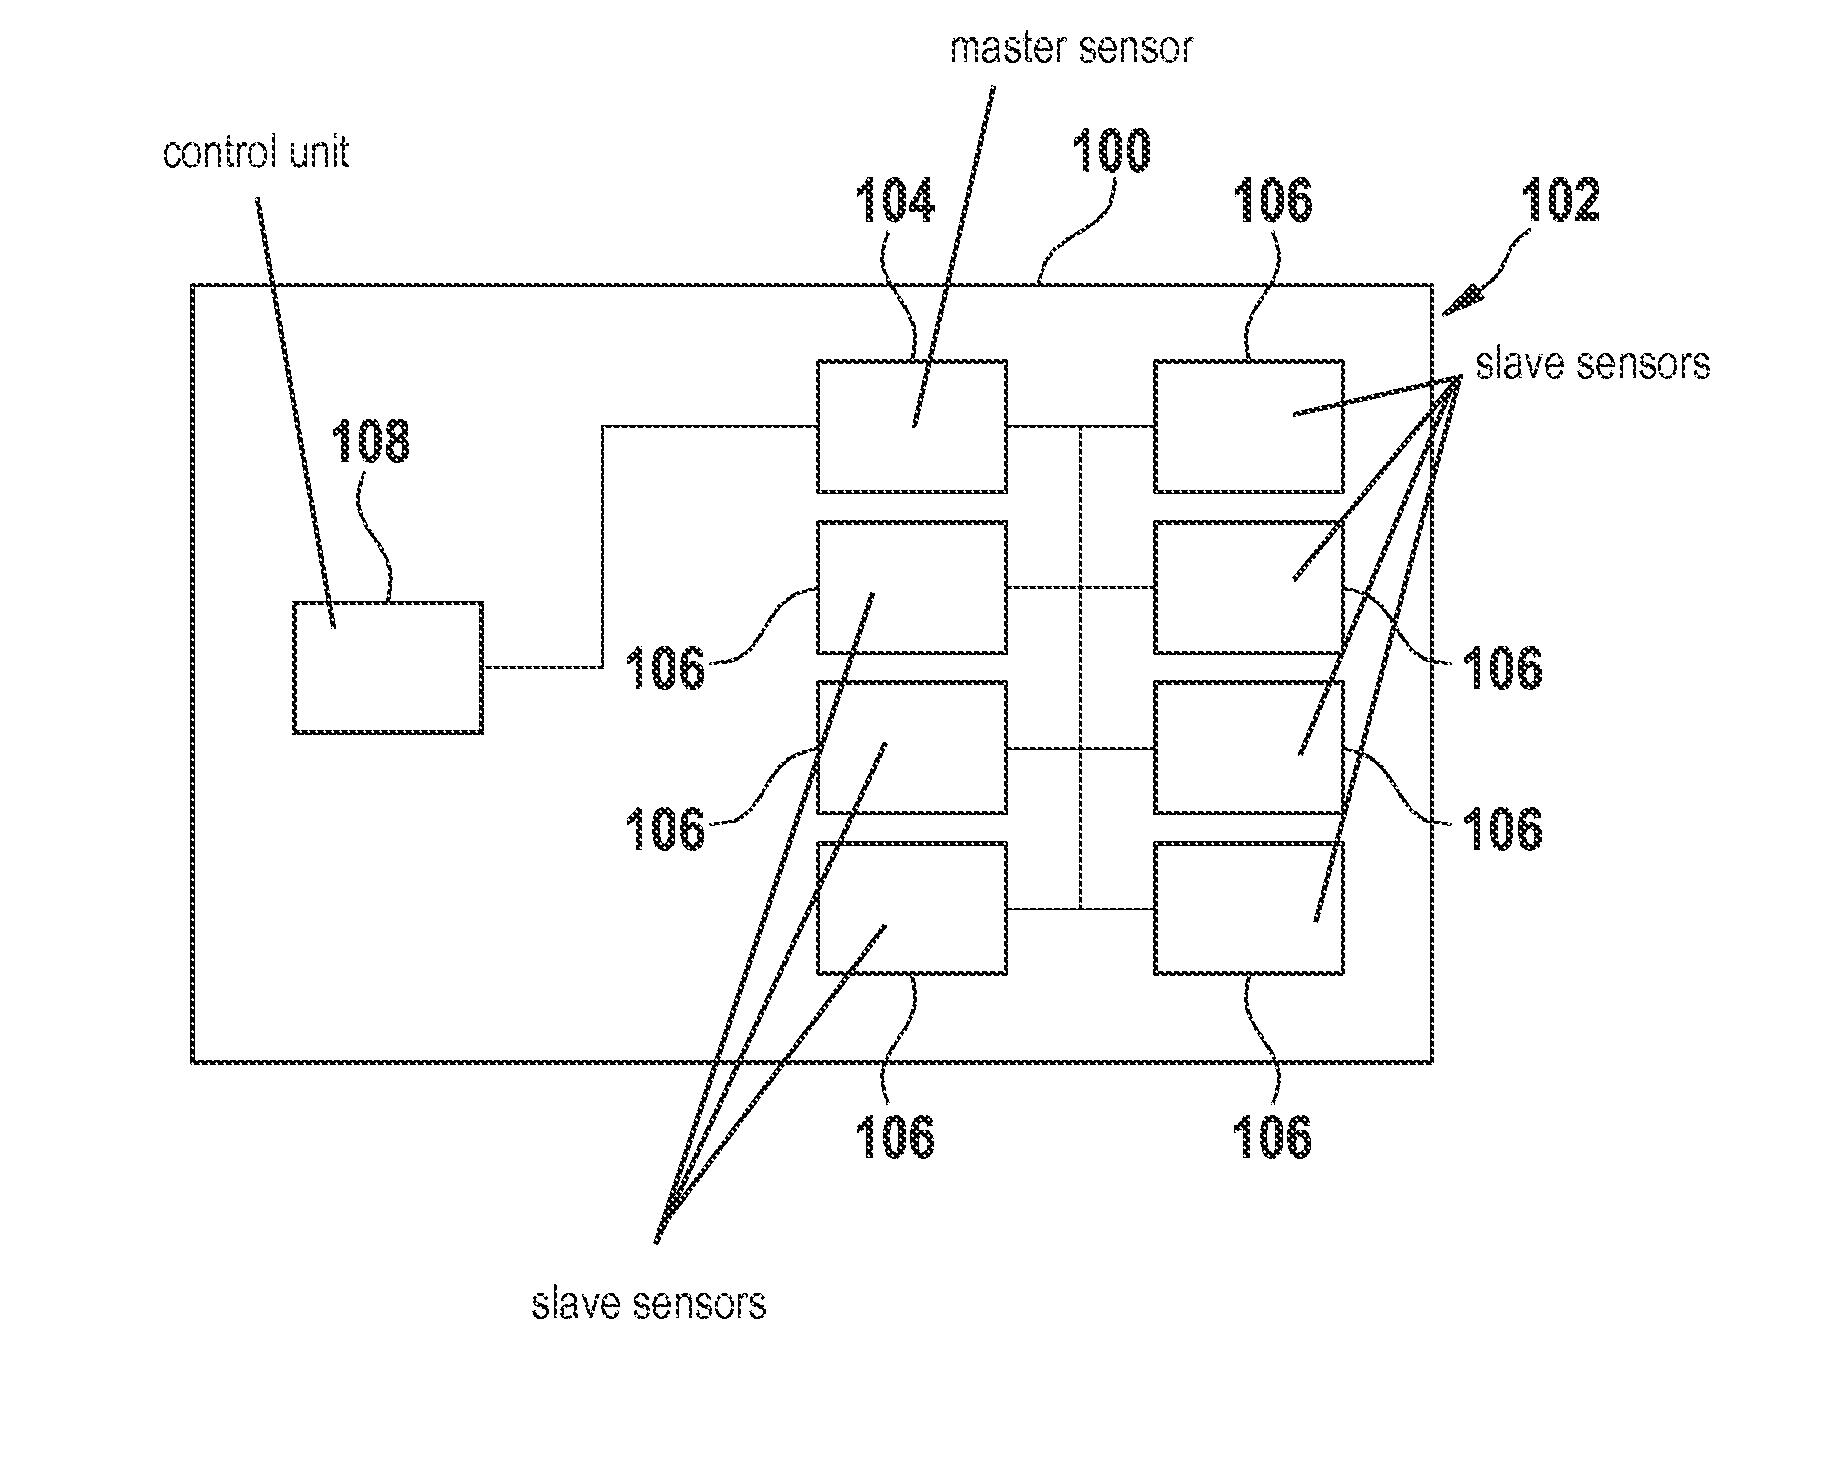 Method and device for coupling a first sensor to at least one second sensor